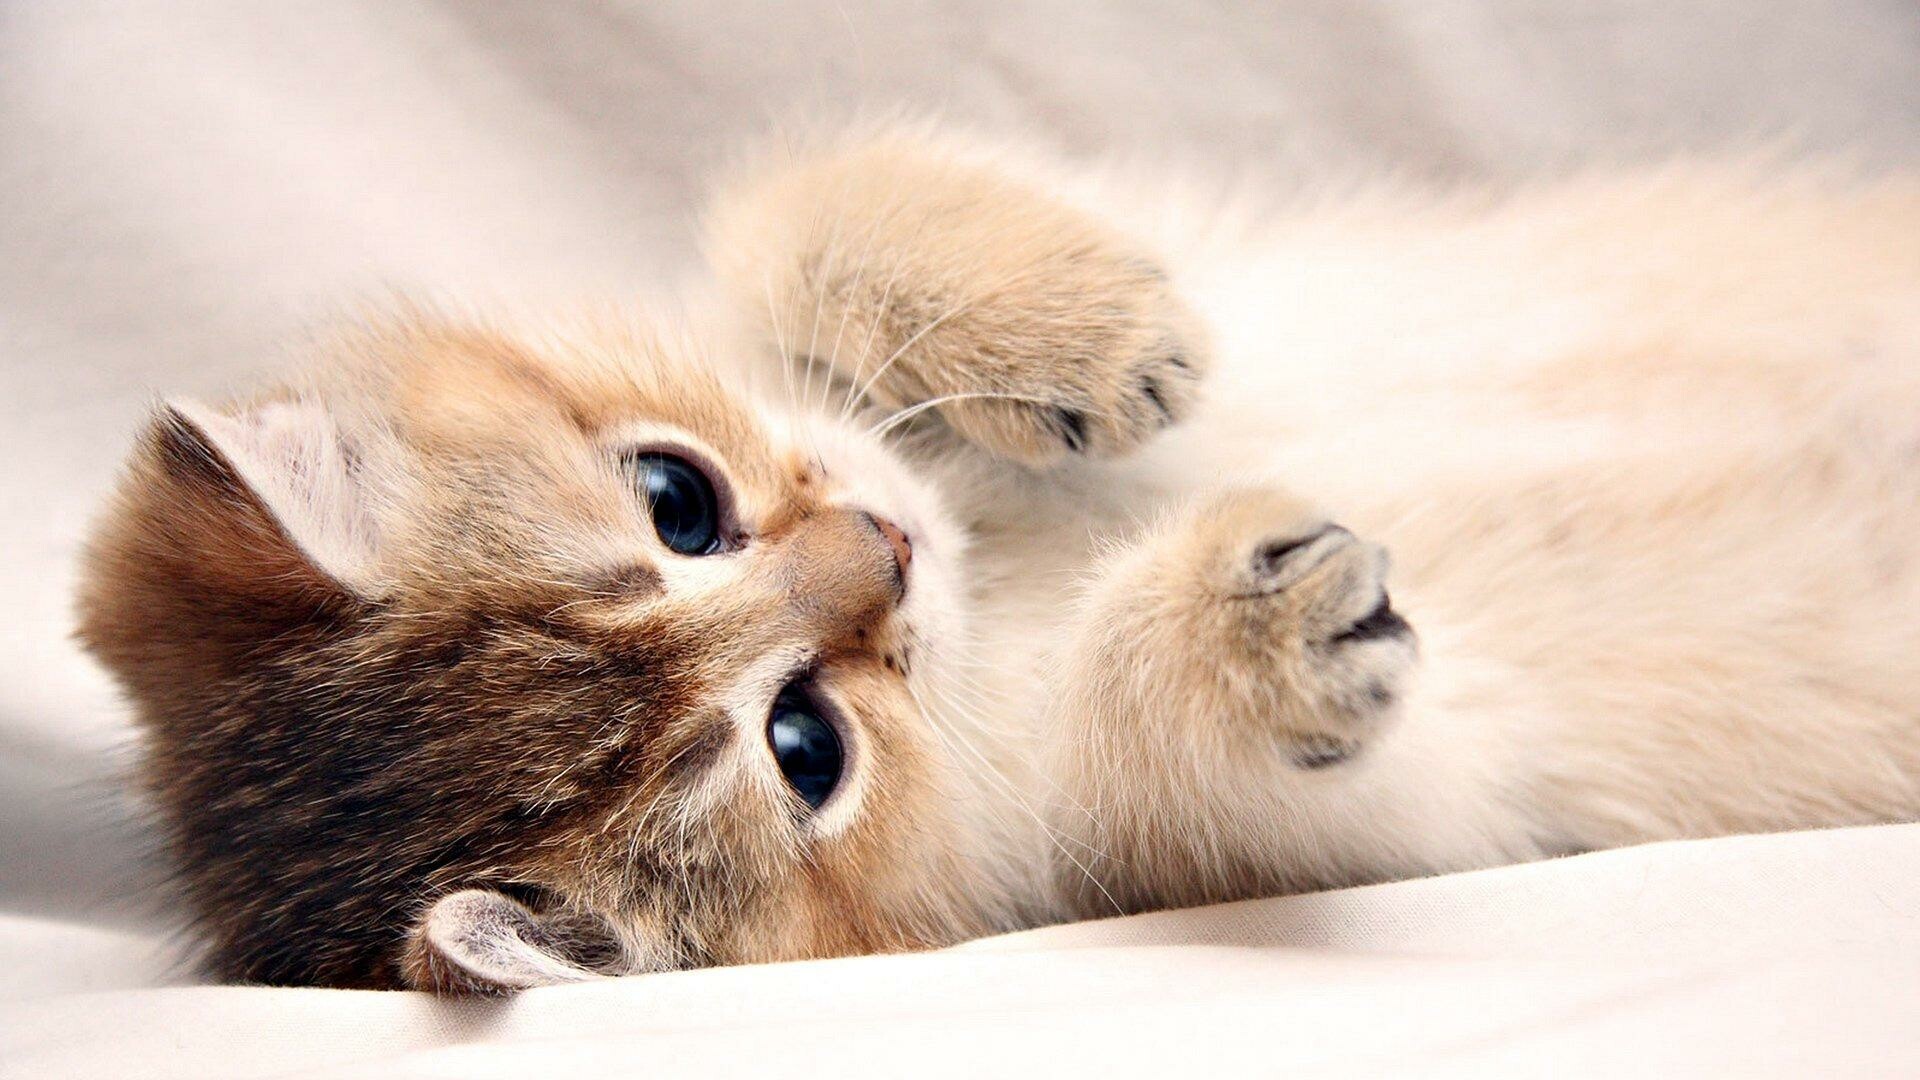 Kitten Wallpaper: HD, 4K, 5K for PC and Mobile. Download free image for iPhone, Android